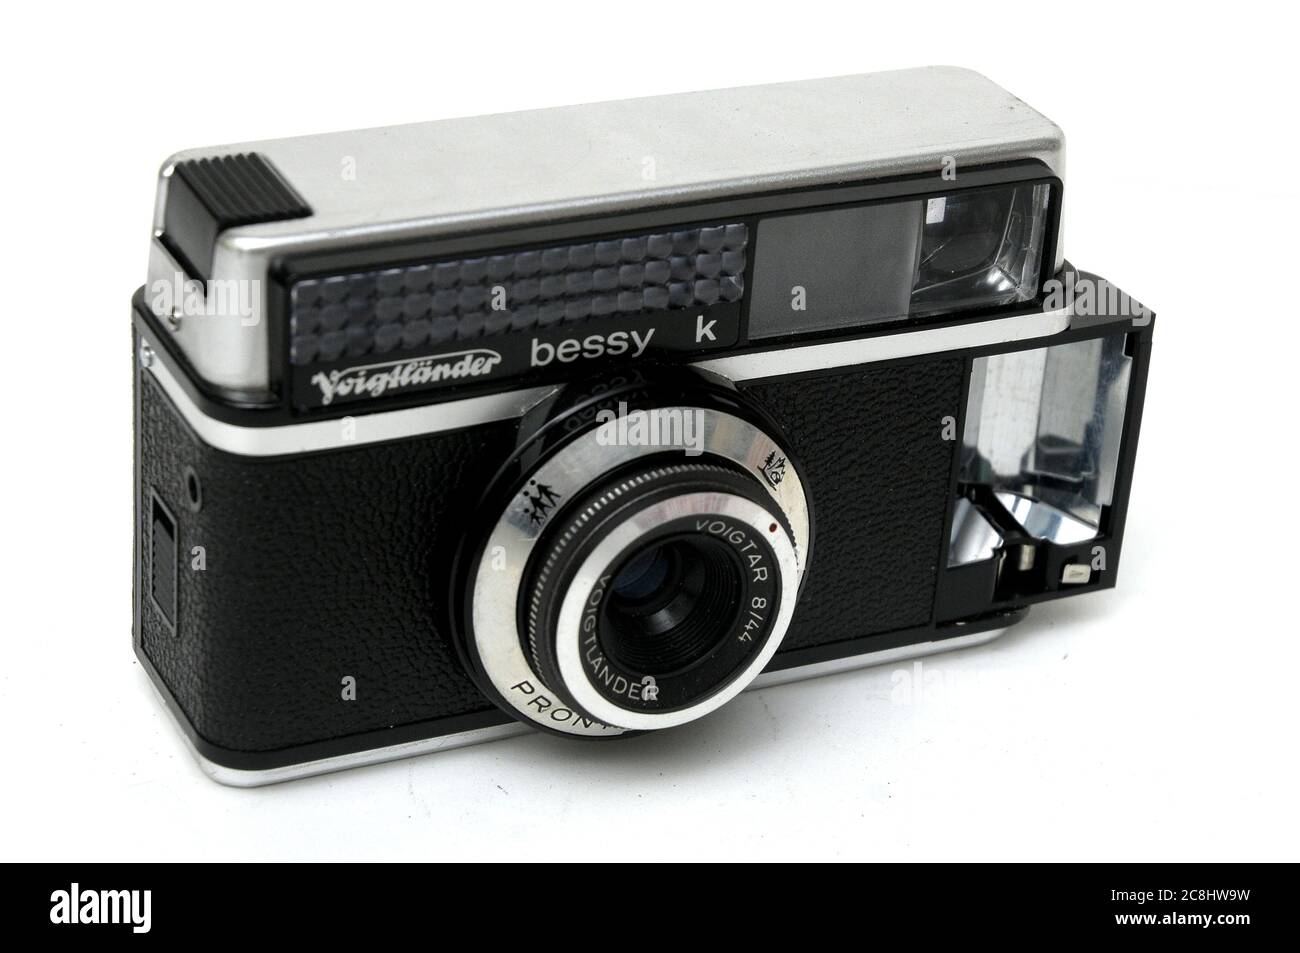 OLD CAMERA VOIGTLÄNDER BESSY K, Vintage, art, photography, second hand, used, old camera, retro, made in West Germany, 1965 Stock Photo